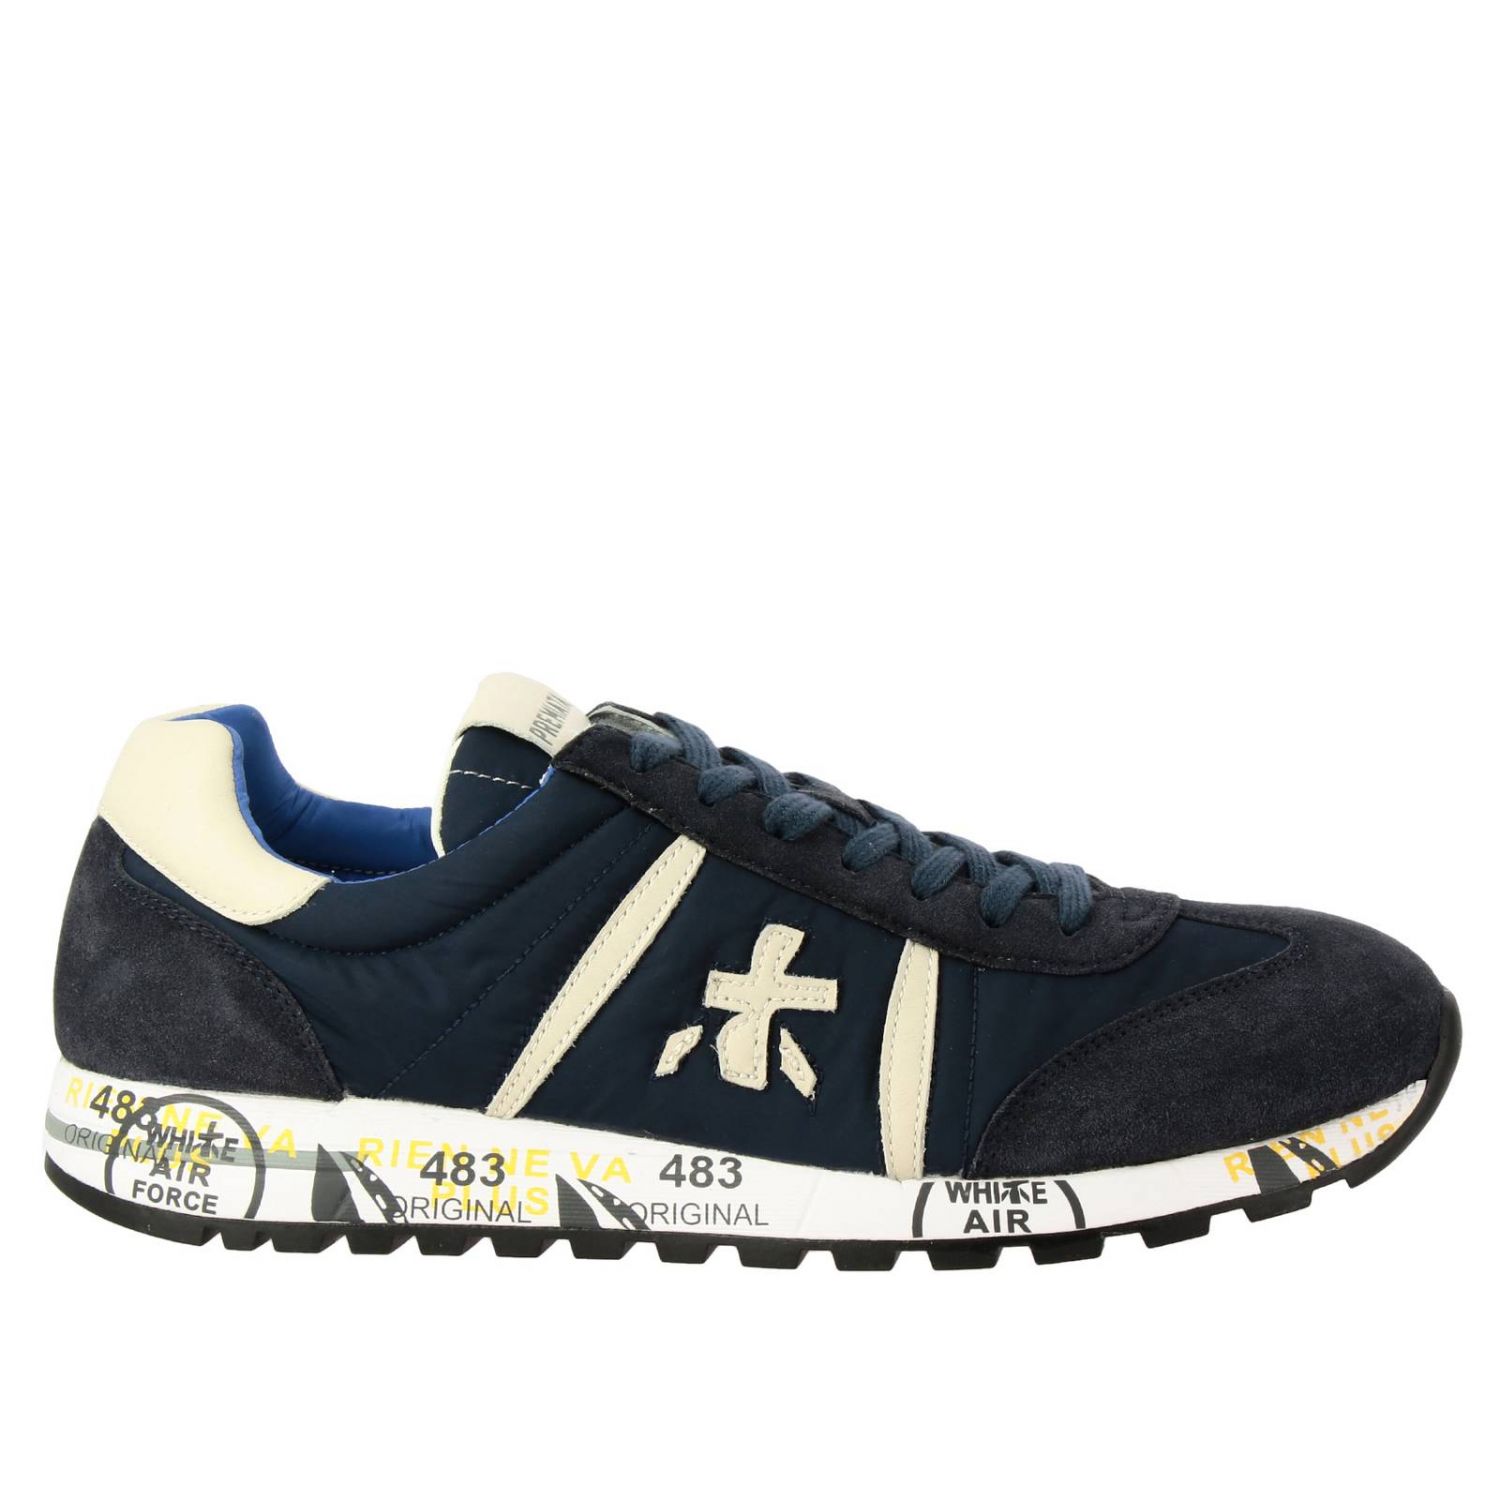 Premiata Outlet: Lucy sneakers in nylon and suede leather with rubber ...